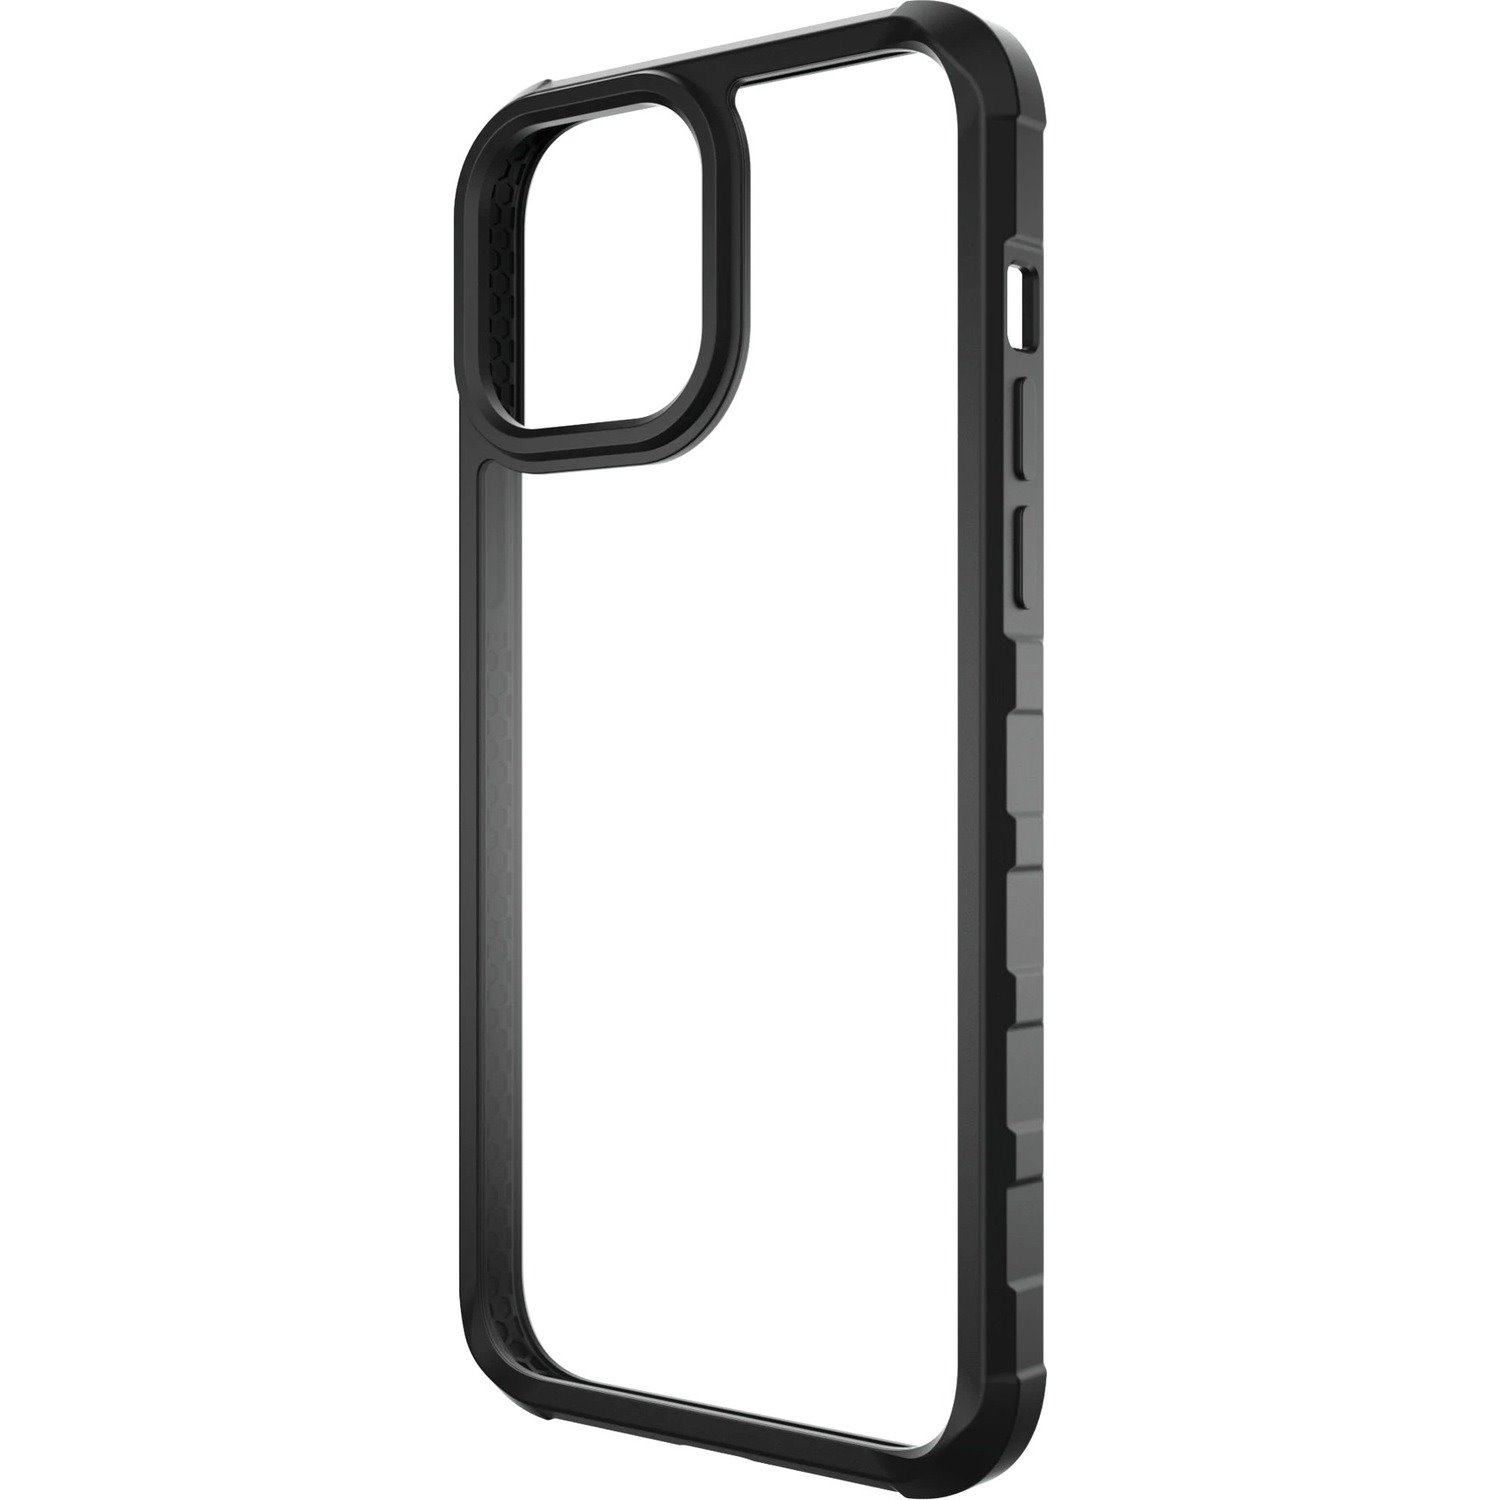 PanzerGlass SilverBullet Rugged Case for Apple iPhone 13 Pro Max Smartphone - Honeycomb - Black, Transparent